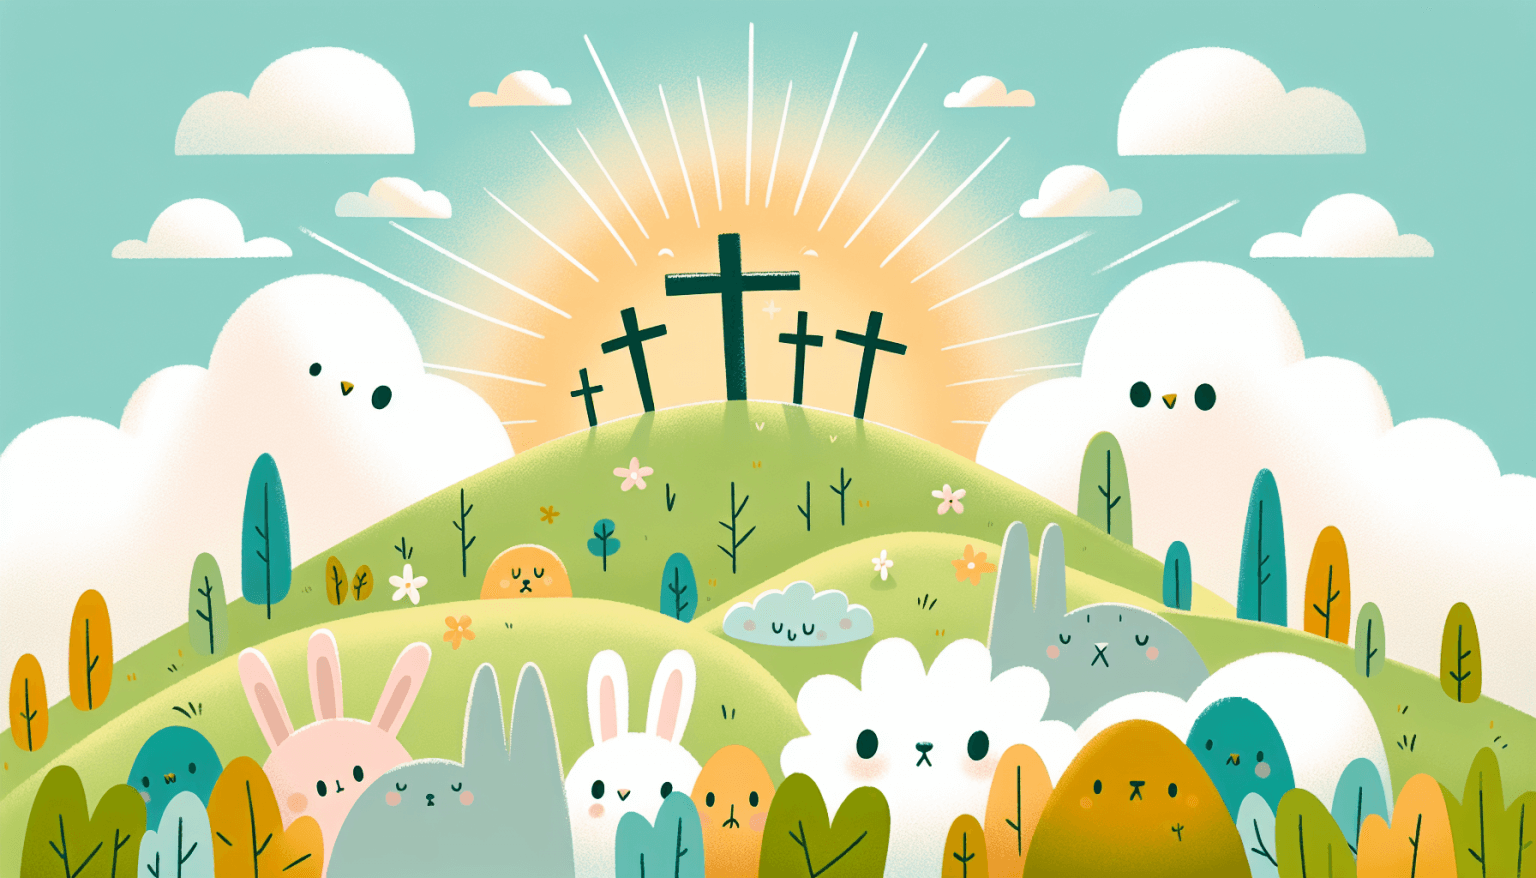 Colorful, child-friendly illustration of a gentle hill with three simple crosses under a bright sky, surrounded by diverse cartoon-style animals quietly watching, conveying a calm and non-graphic repr